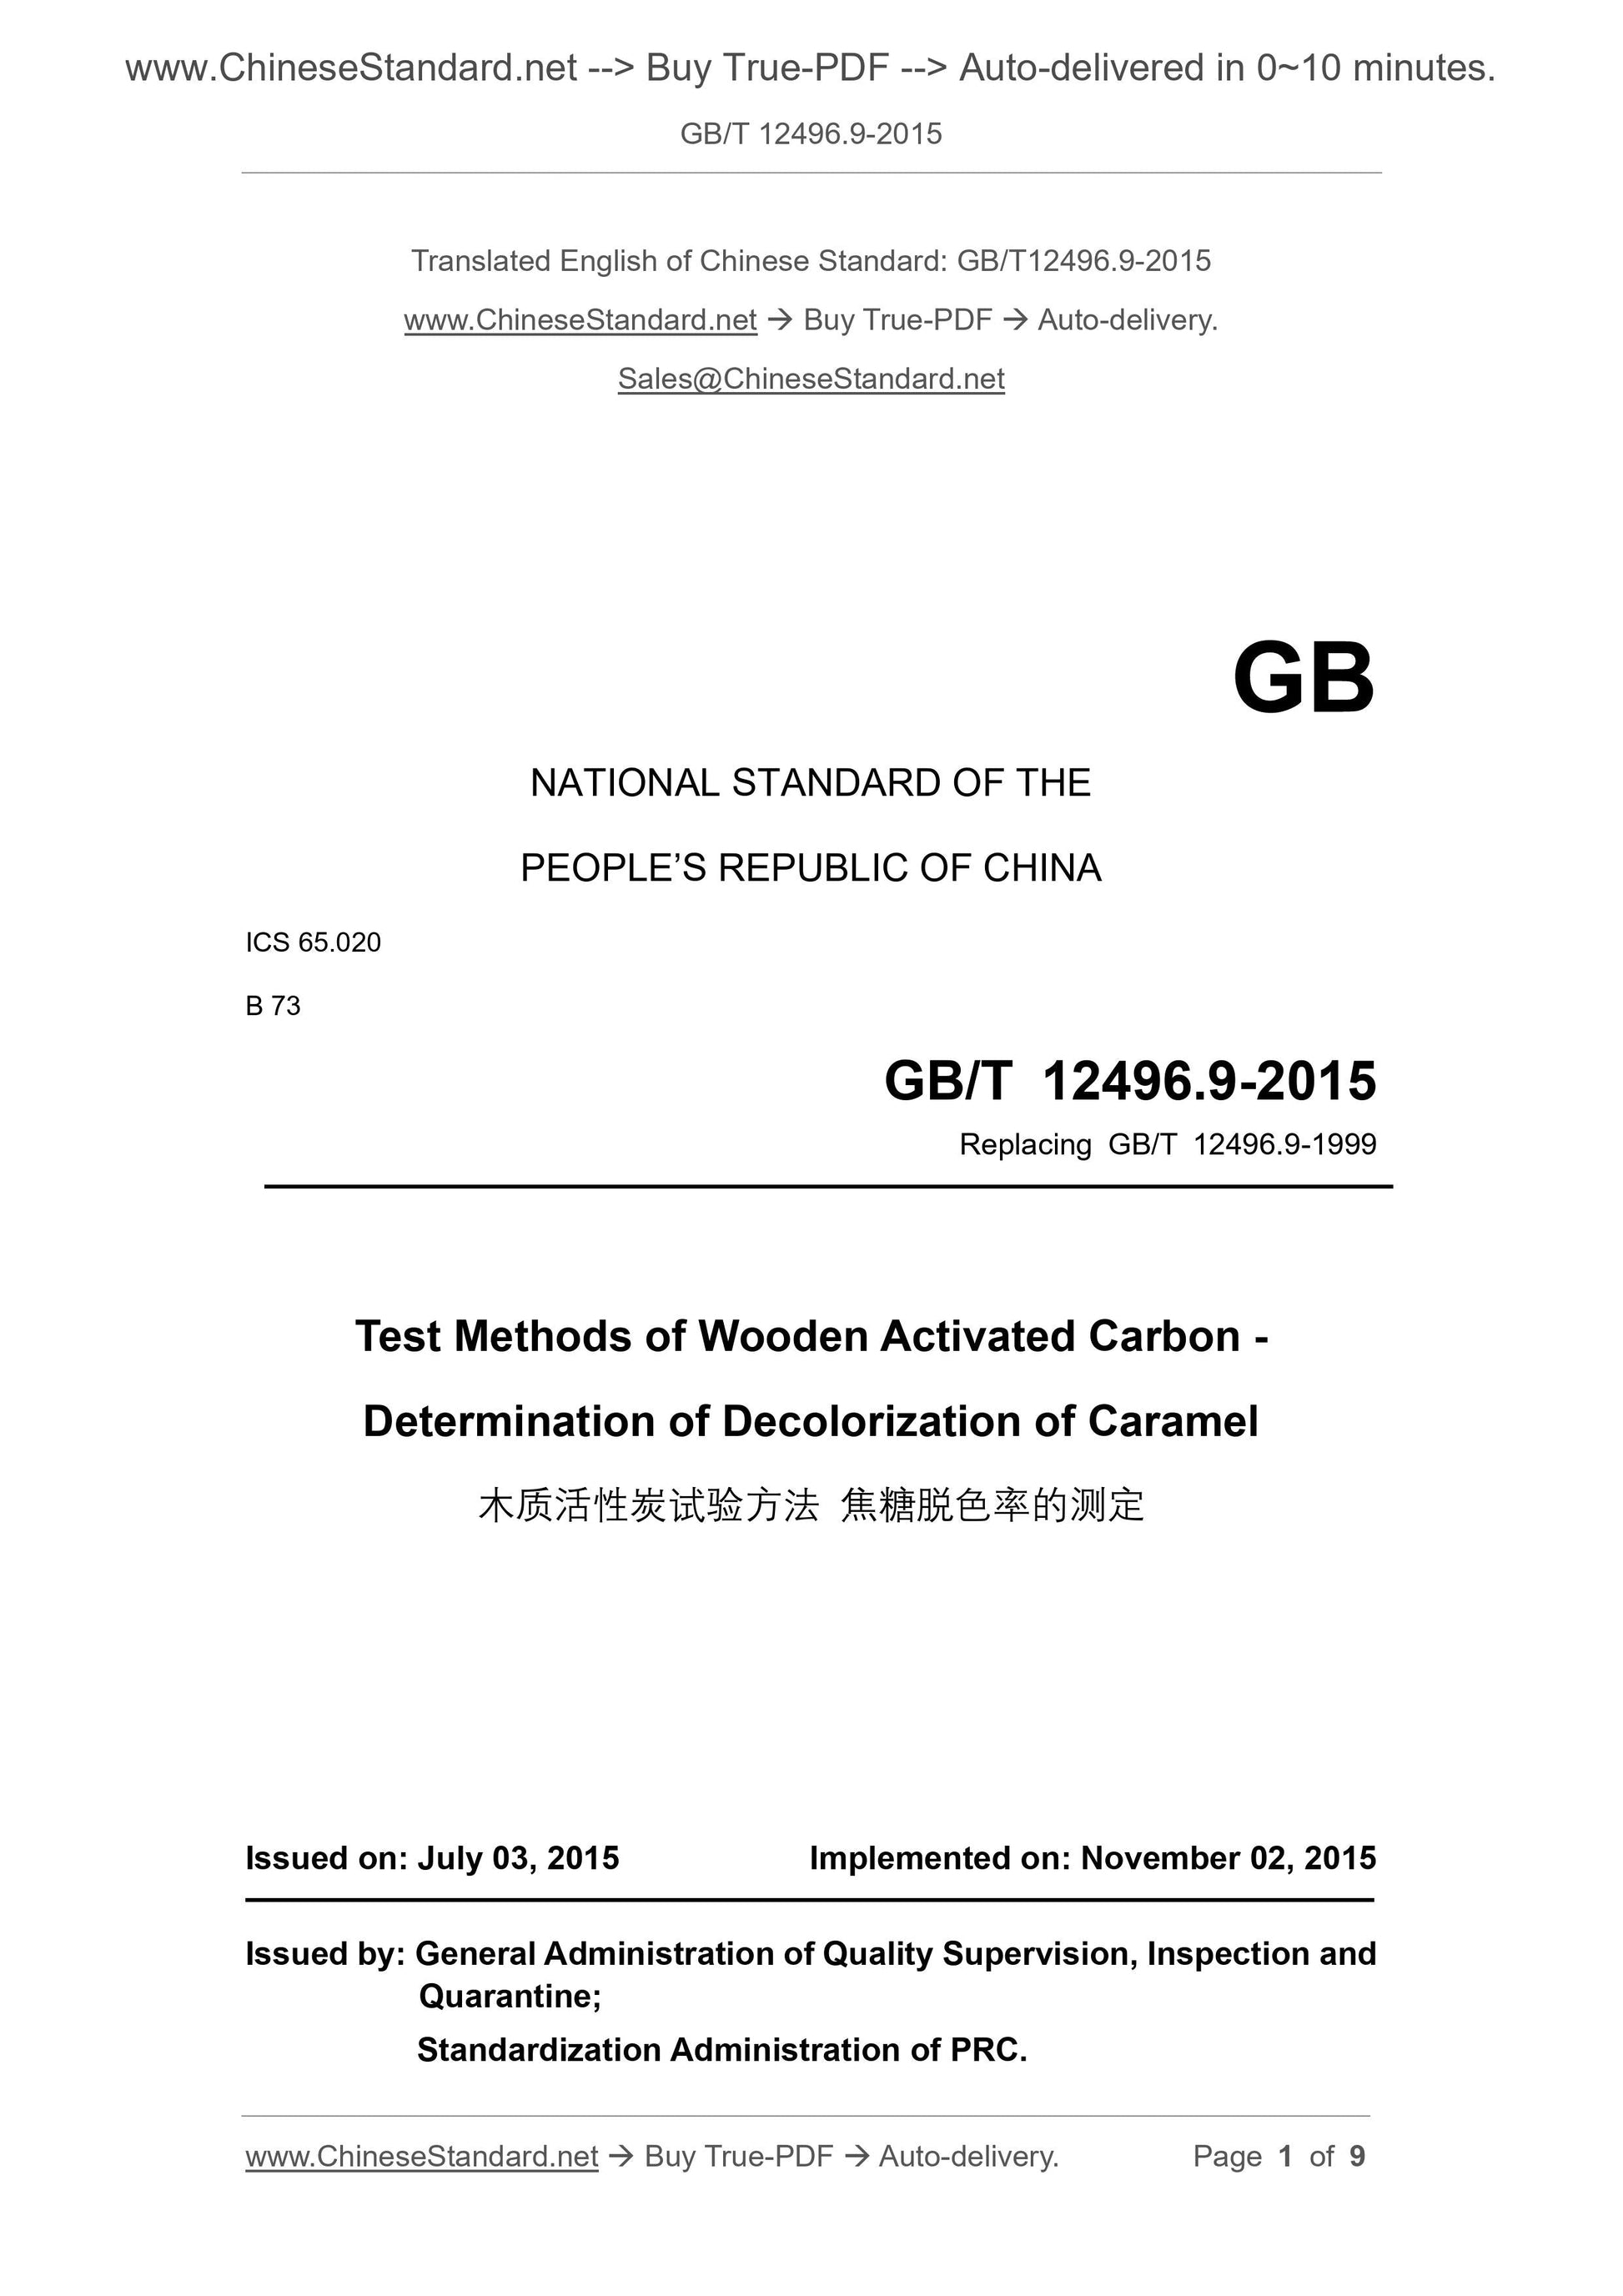 GB/T 12496.9-2015 Page 1